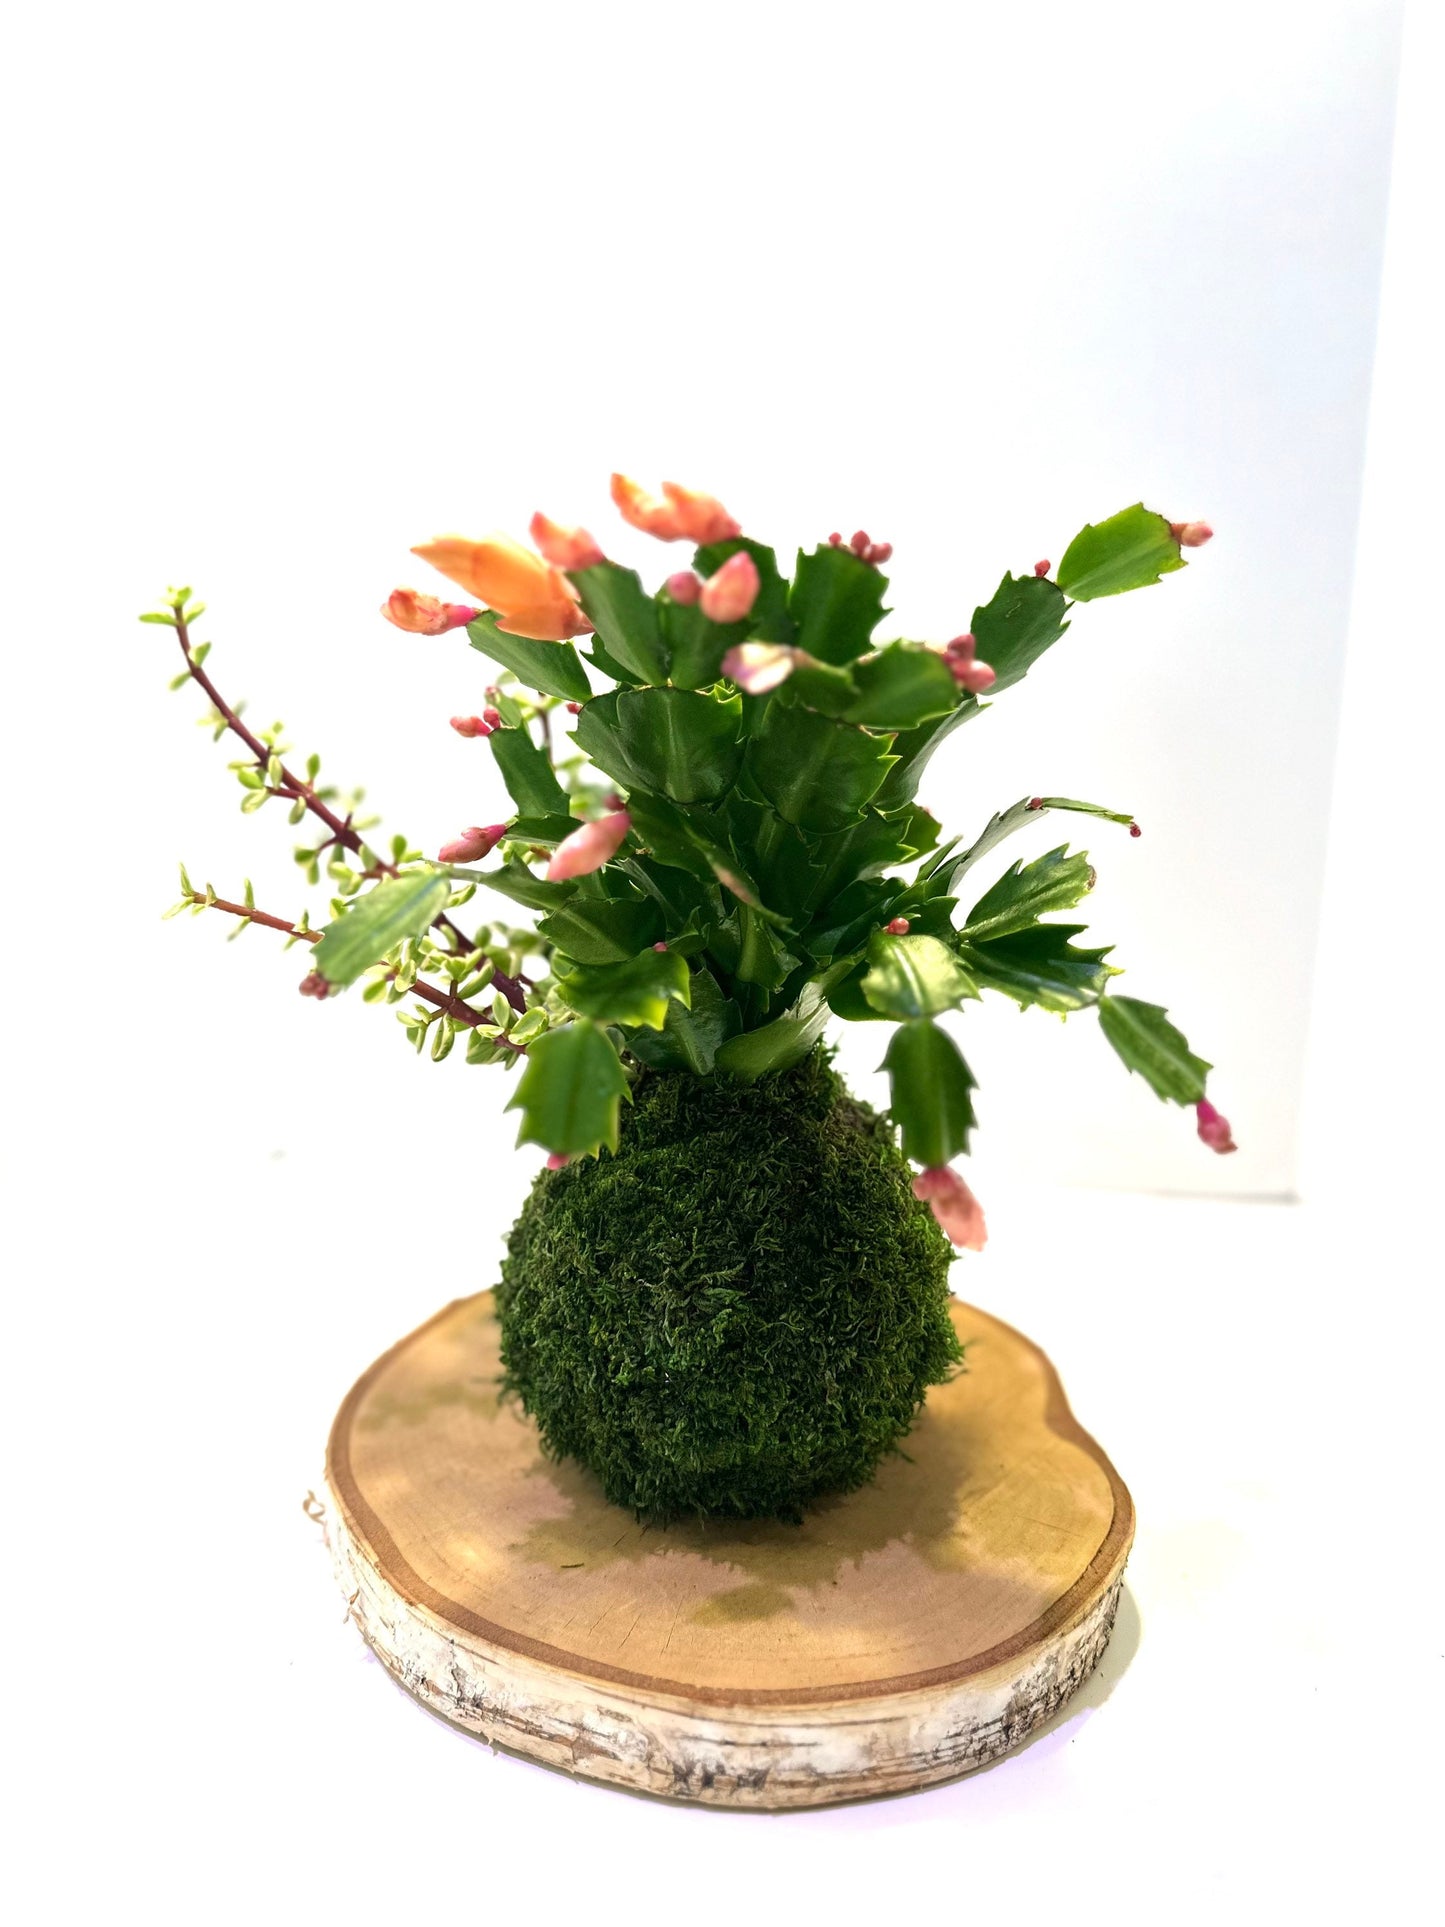 Hanging Christmas Cactus arranged Kokedama, Japanese traditional indoor moss ball garden.For hanging, with hemp rope.